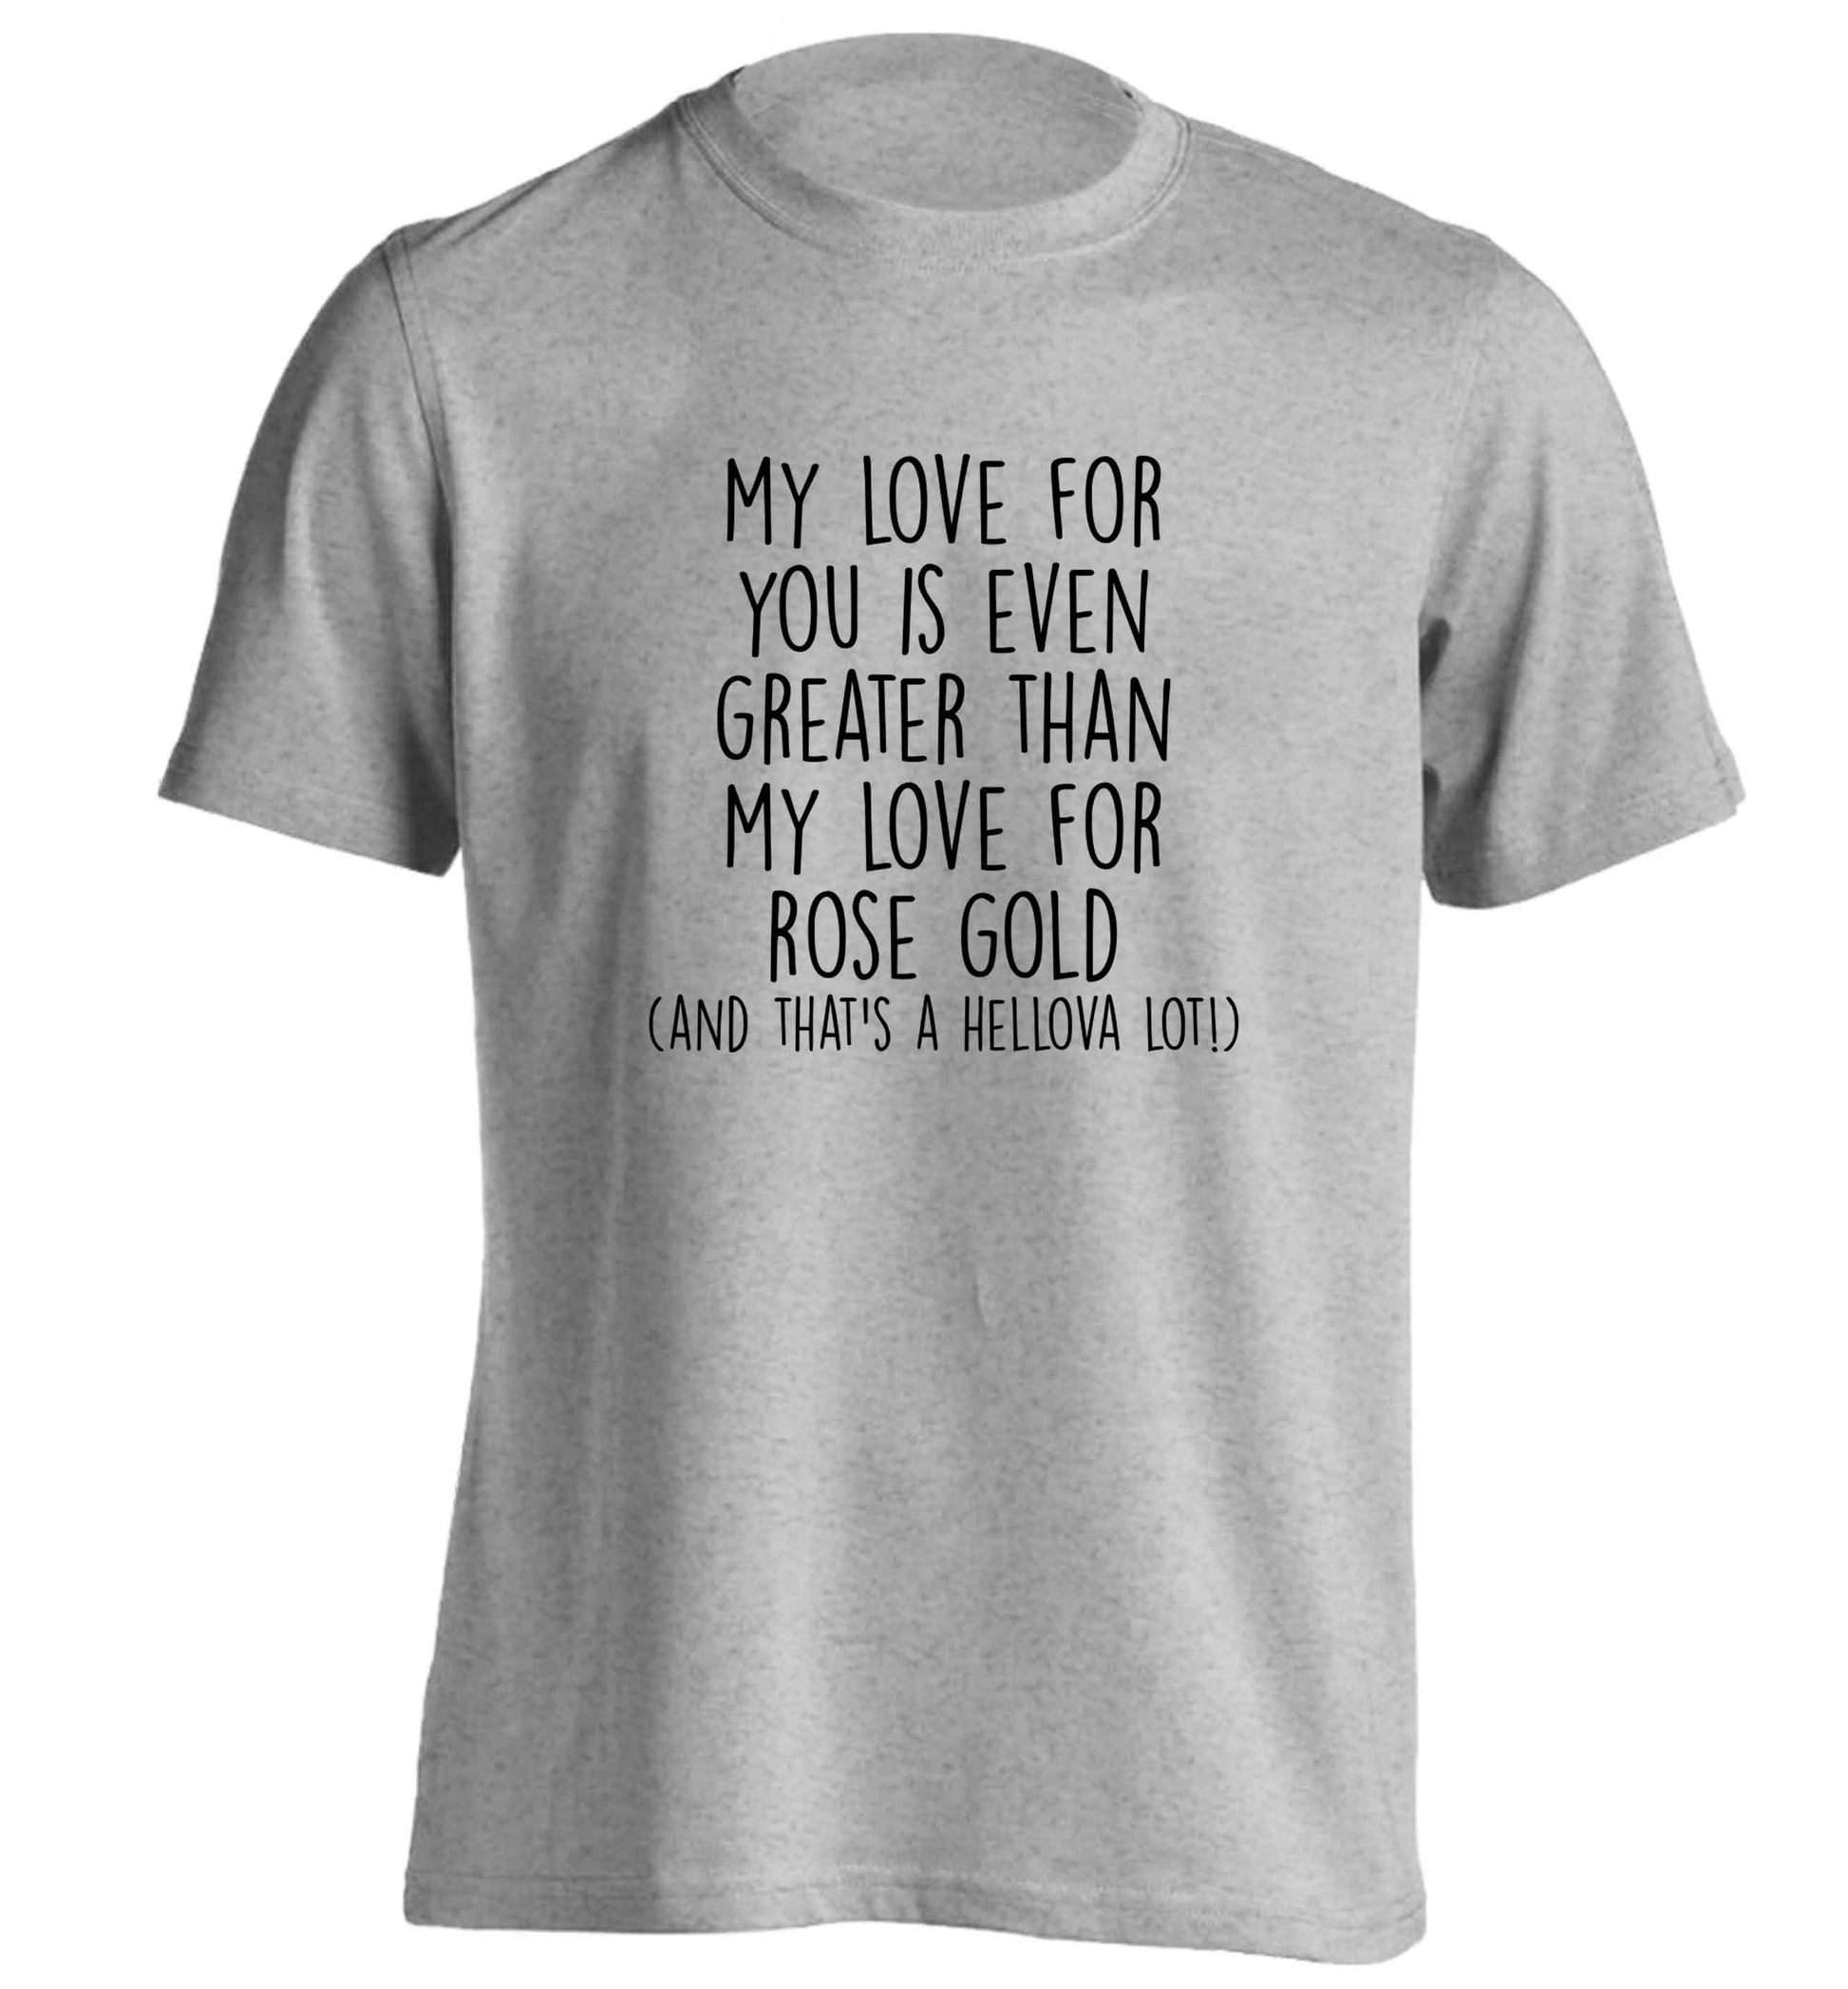 My love for you is even greater than my love for rose gold (and that's a hellova lot) adults unisex grey Tshirt 2XL